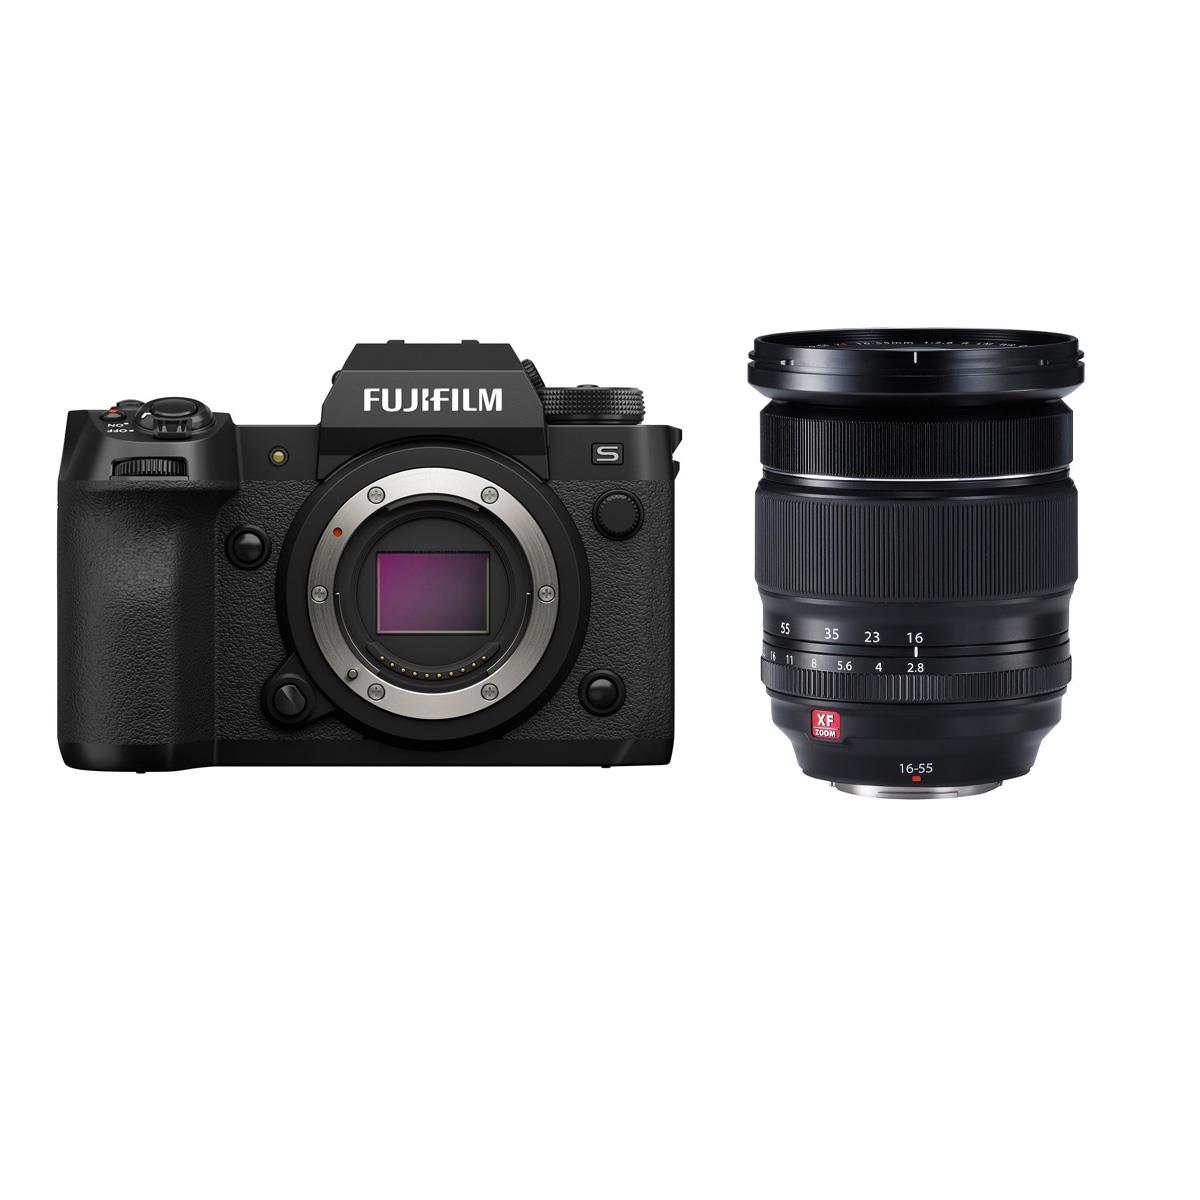 Image of Fujifilm X-H2S Mirrorless Camera with XF 16-55mm F2.8 R LM WR Lens